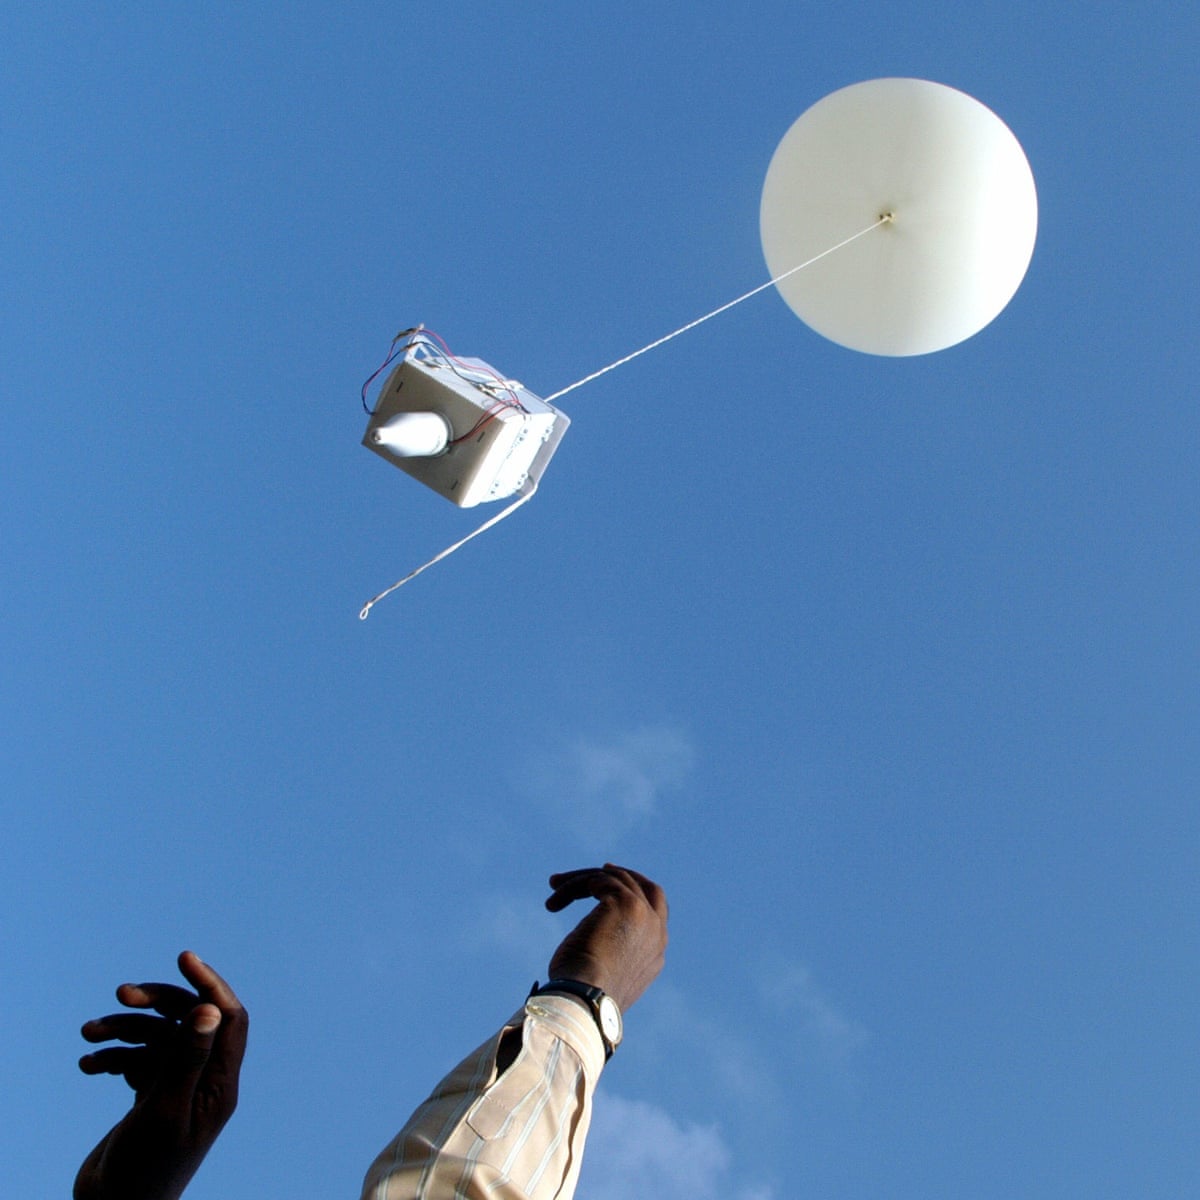 How helium-filled weather balloons keep an eye on our sky | World news | The Guardian